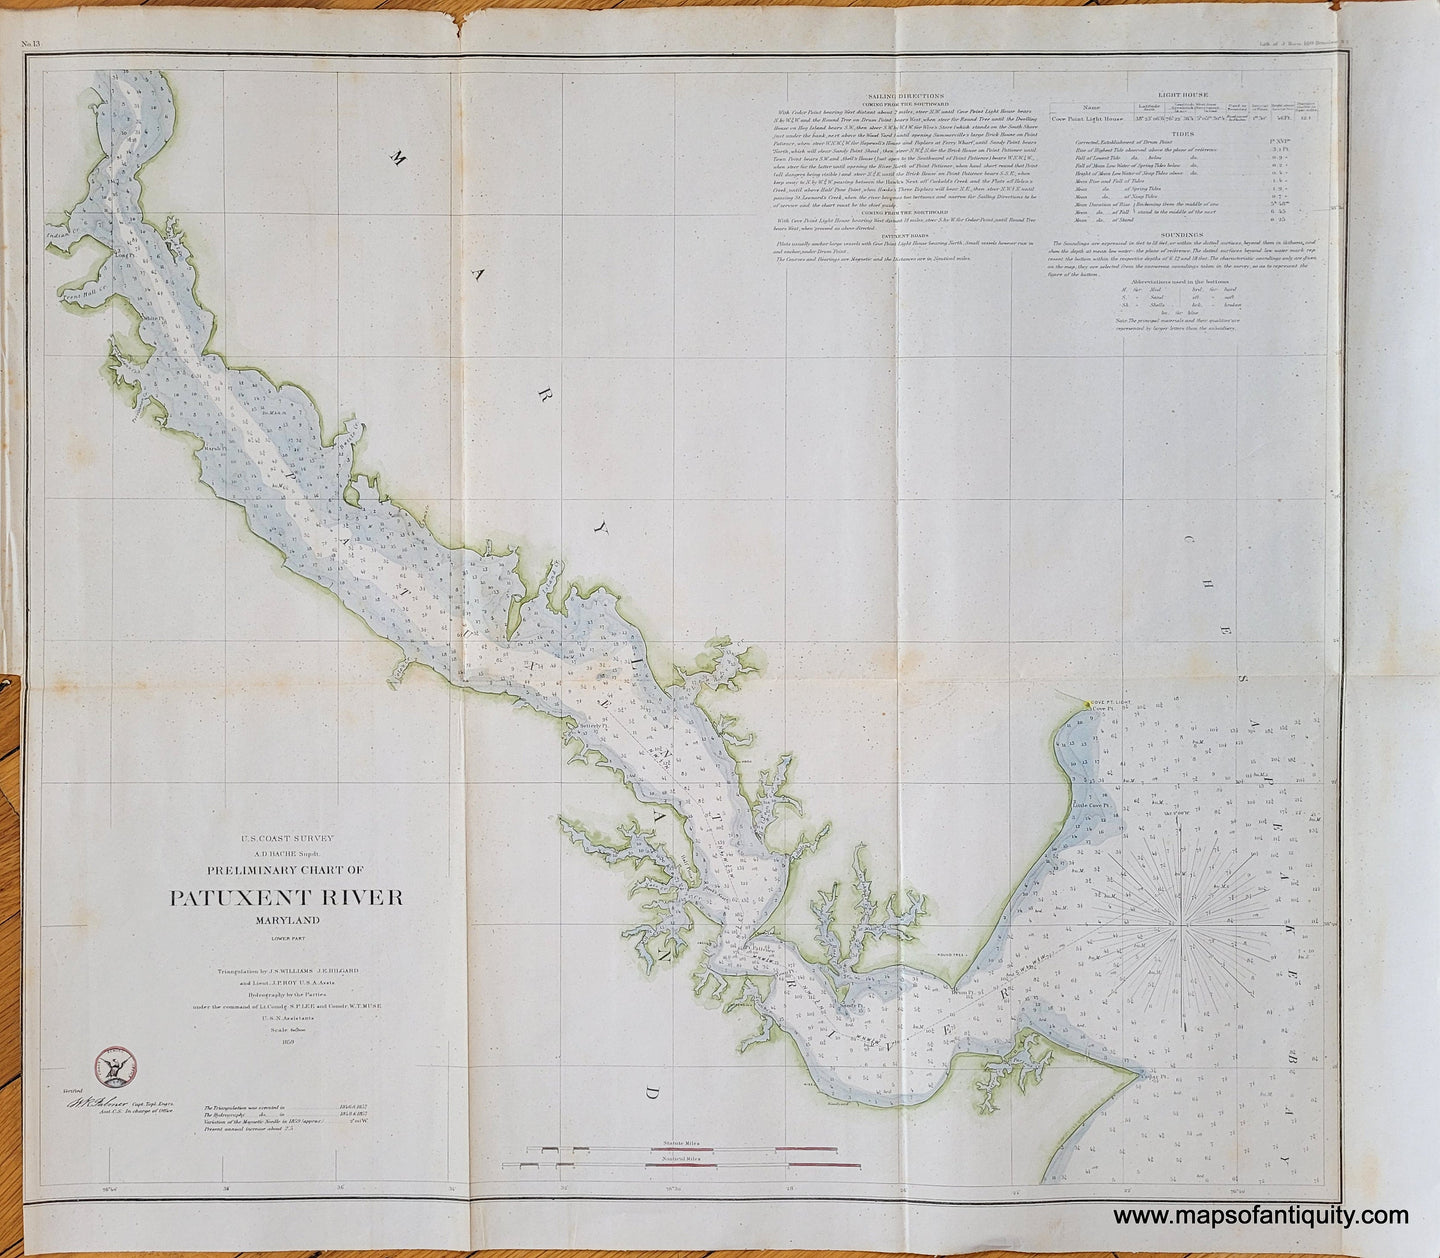 Genuine-Antique-Coast-Survey-Chart-Preliminary-Chart-of-Patuxent-River-Maryland-1859-USCS-Maps-Of-Antiquity